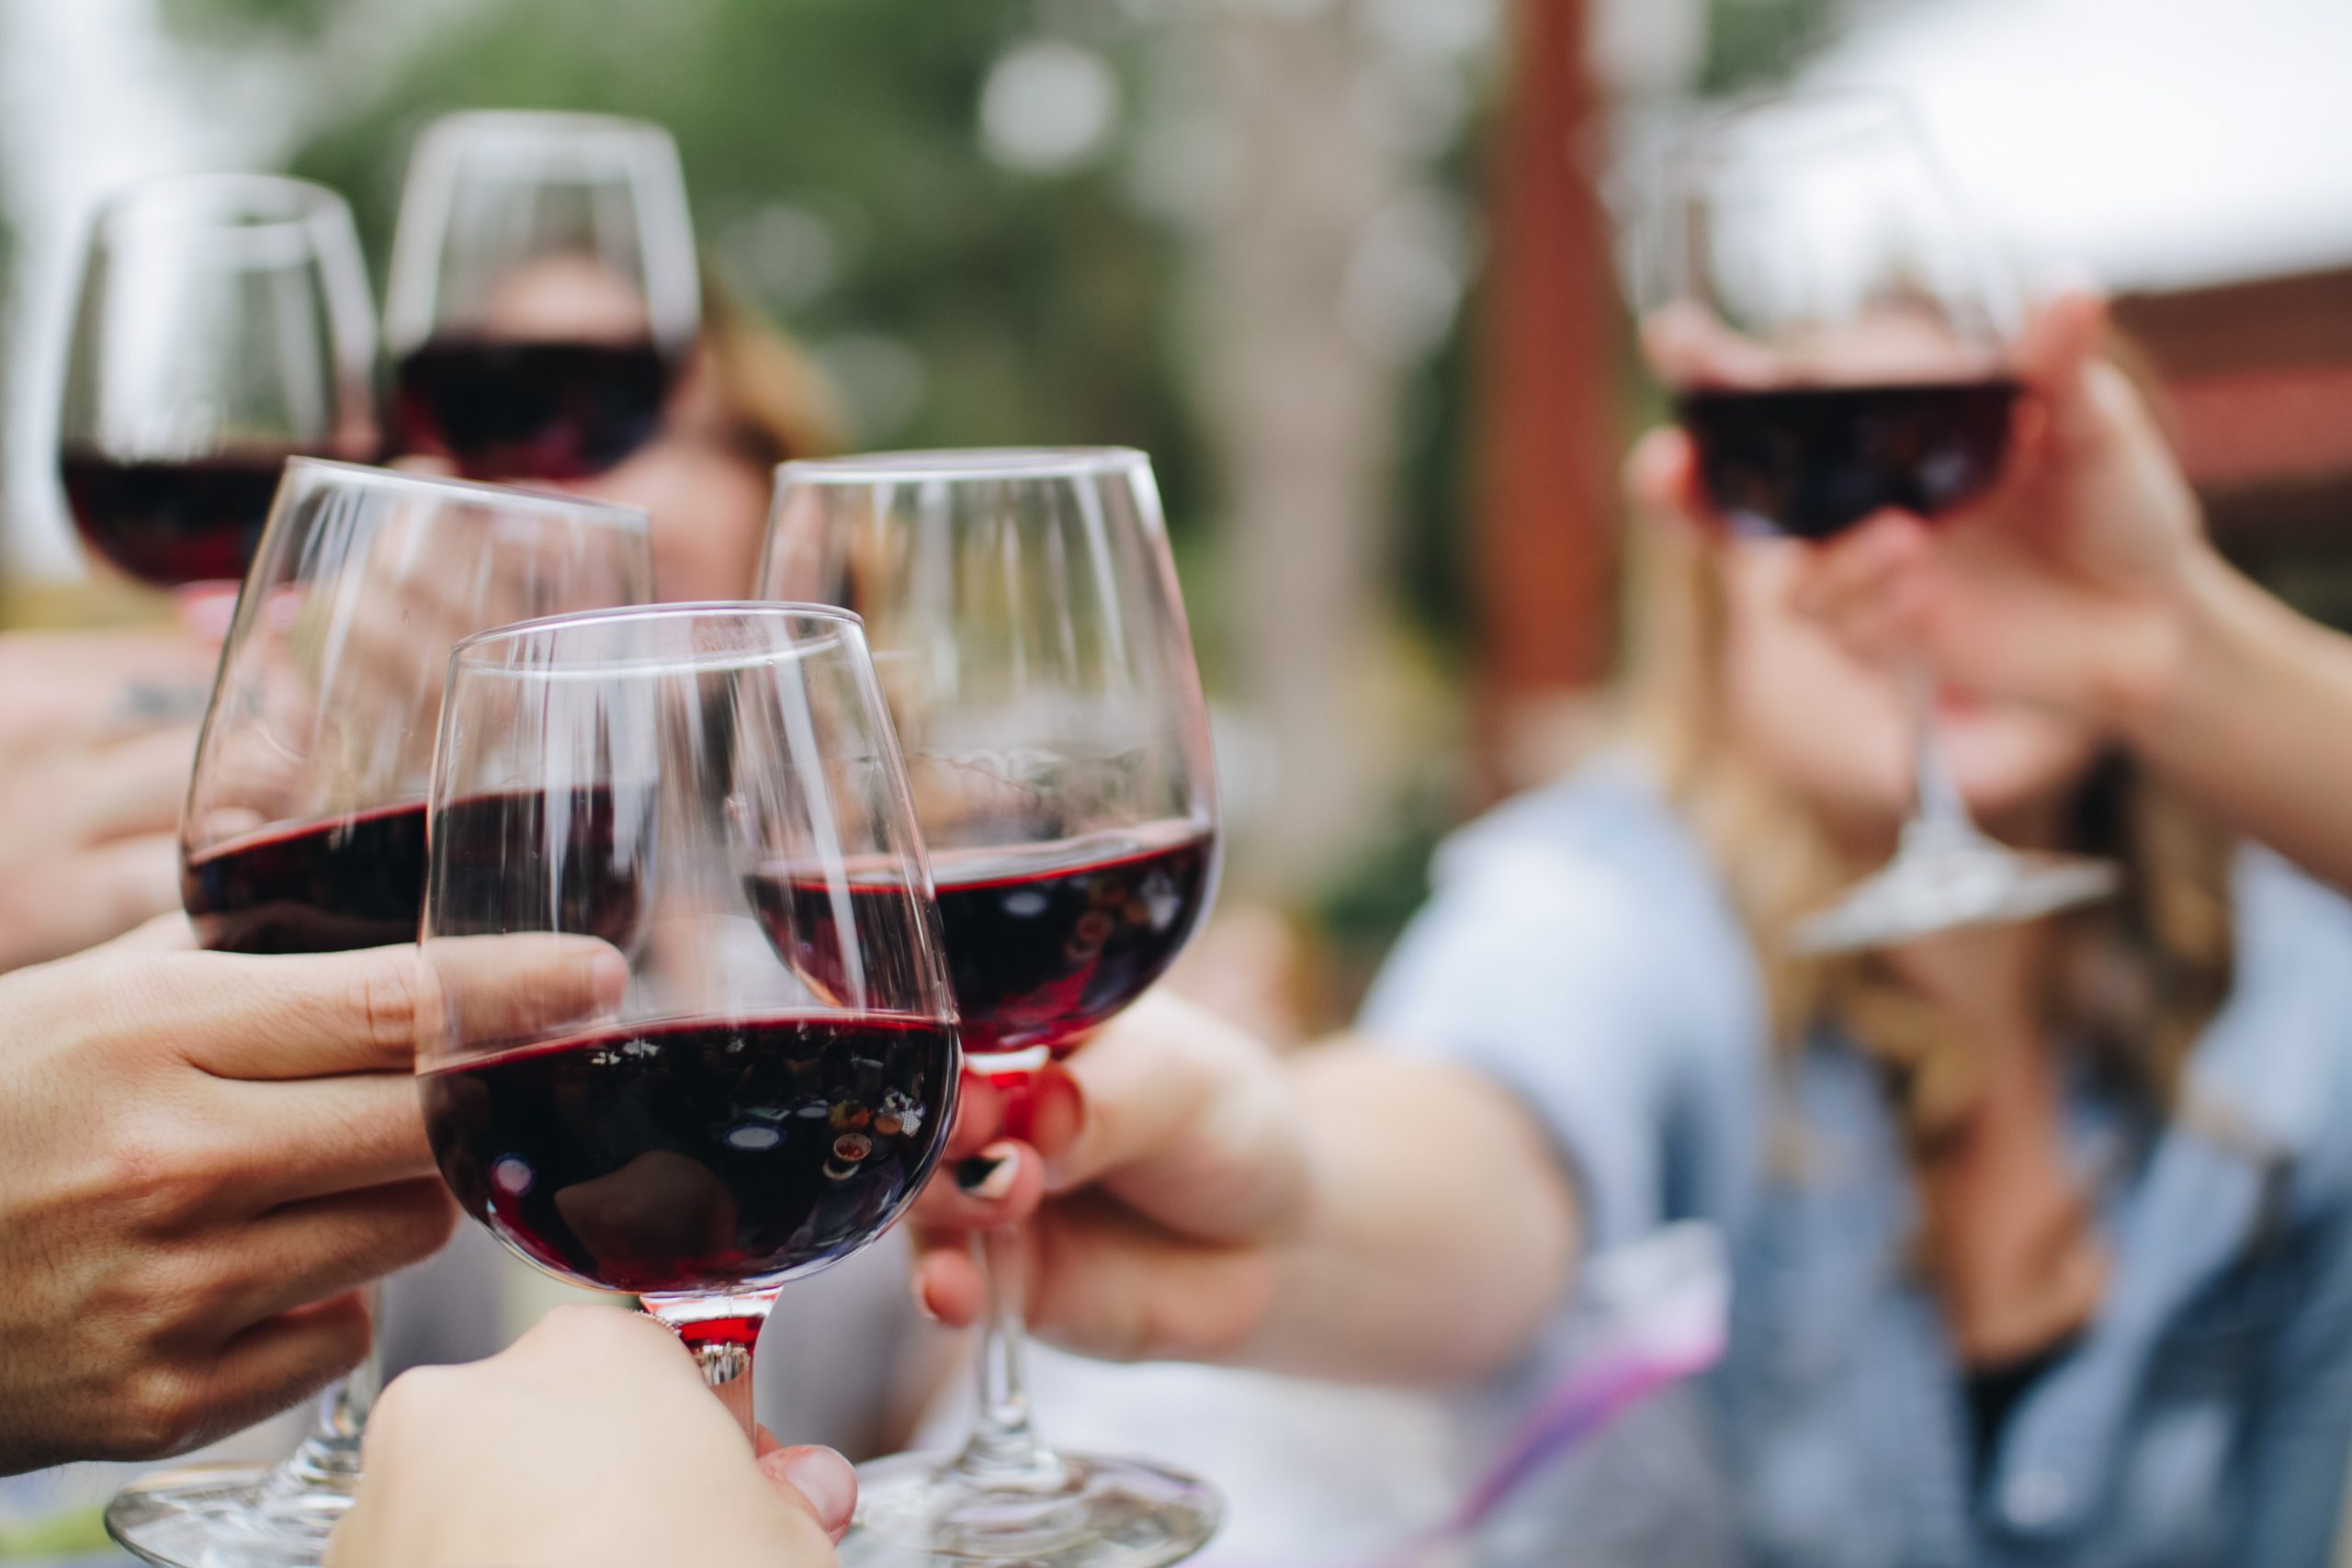 A group of friends make a toast with red wine